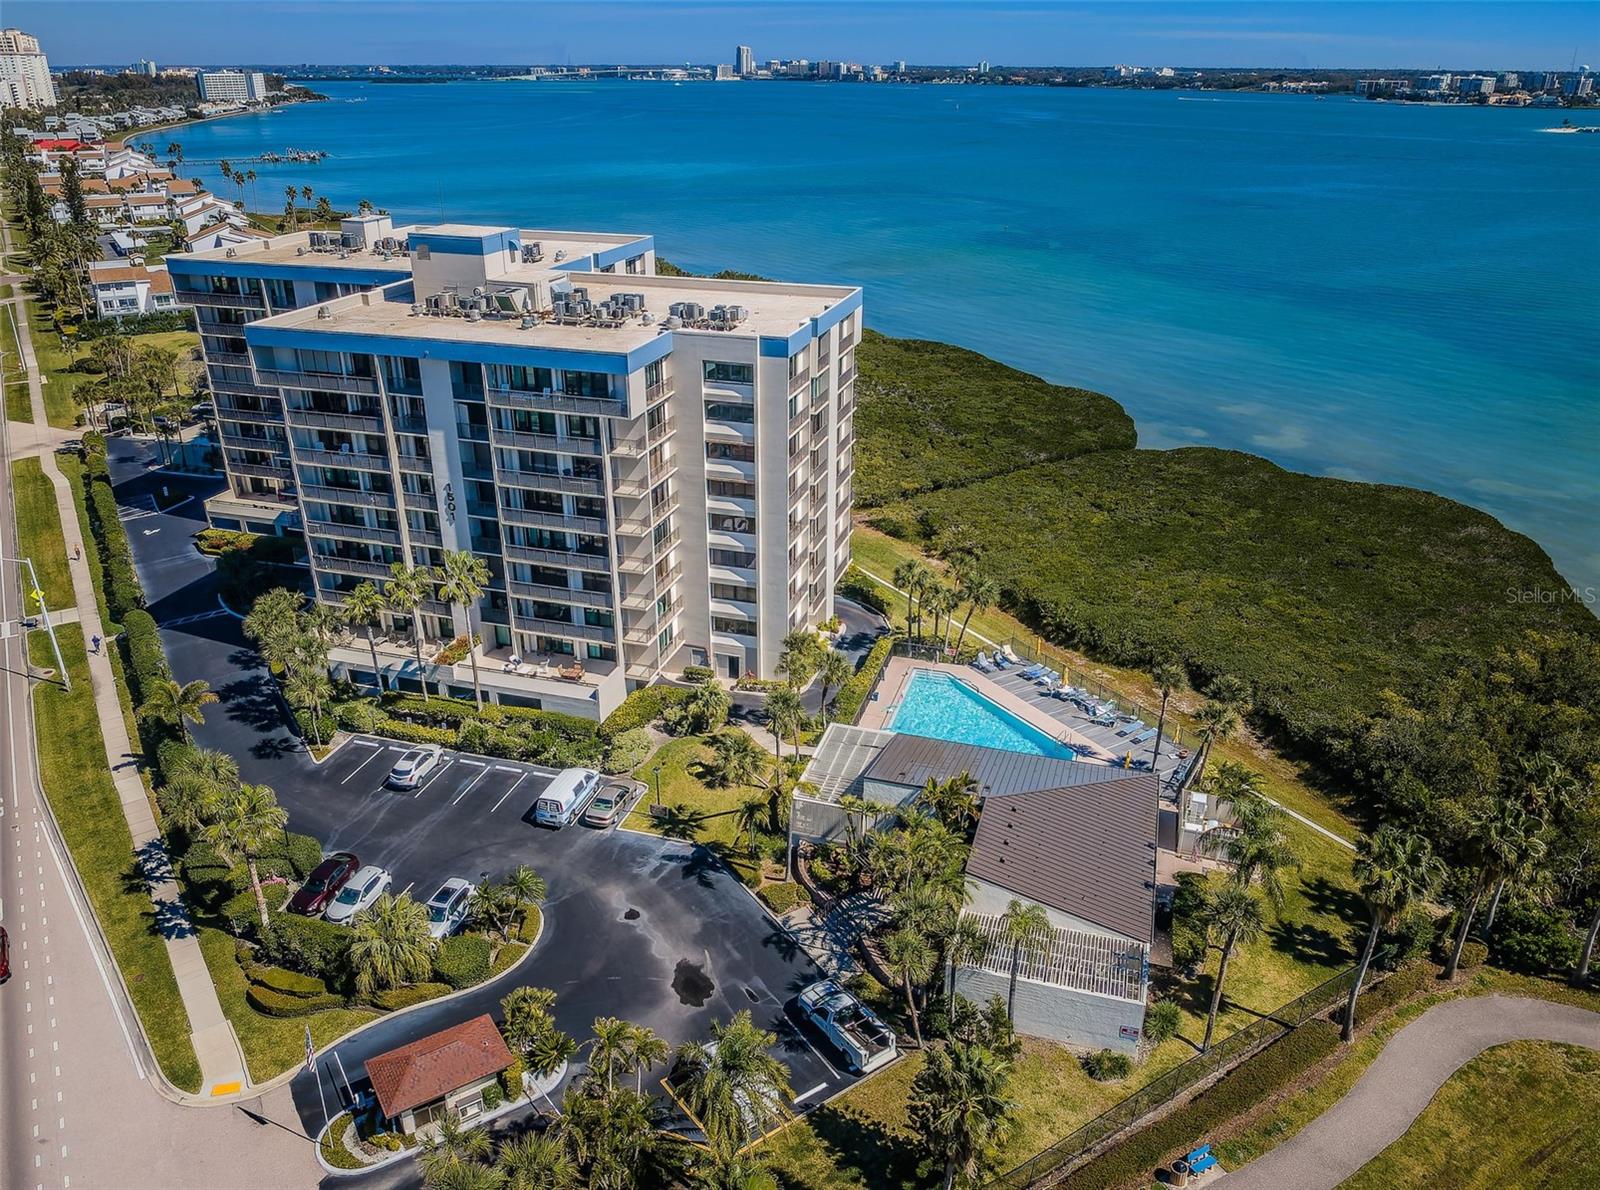 Panorama of The South Bay Properties Situated on Pristine Sand Key